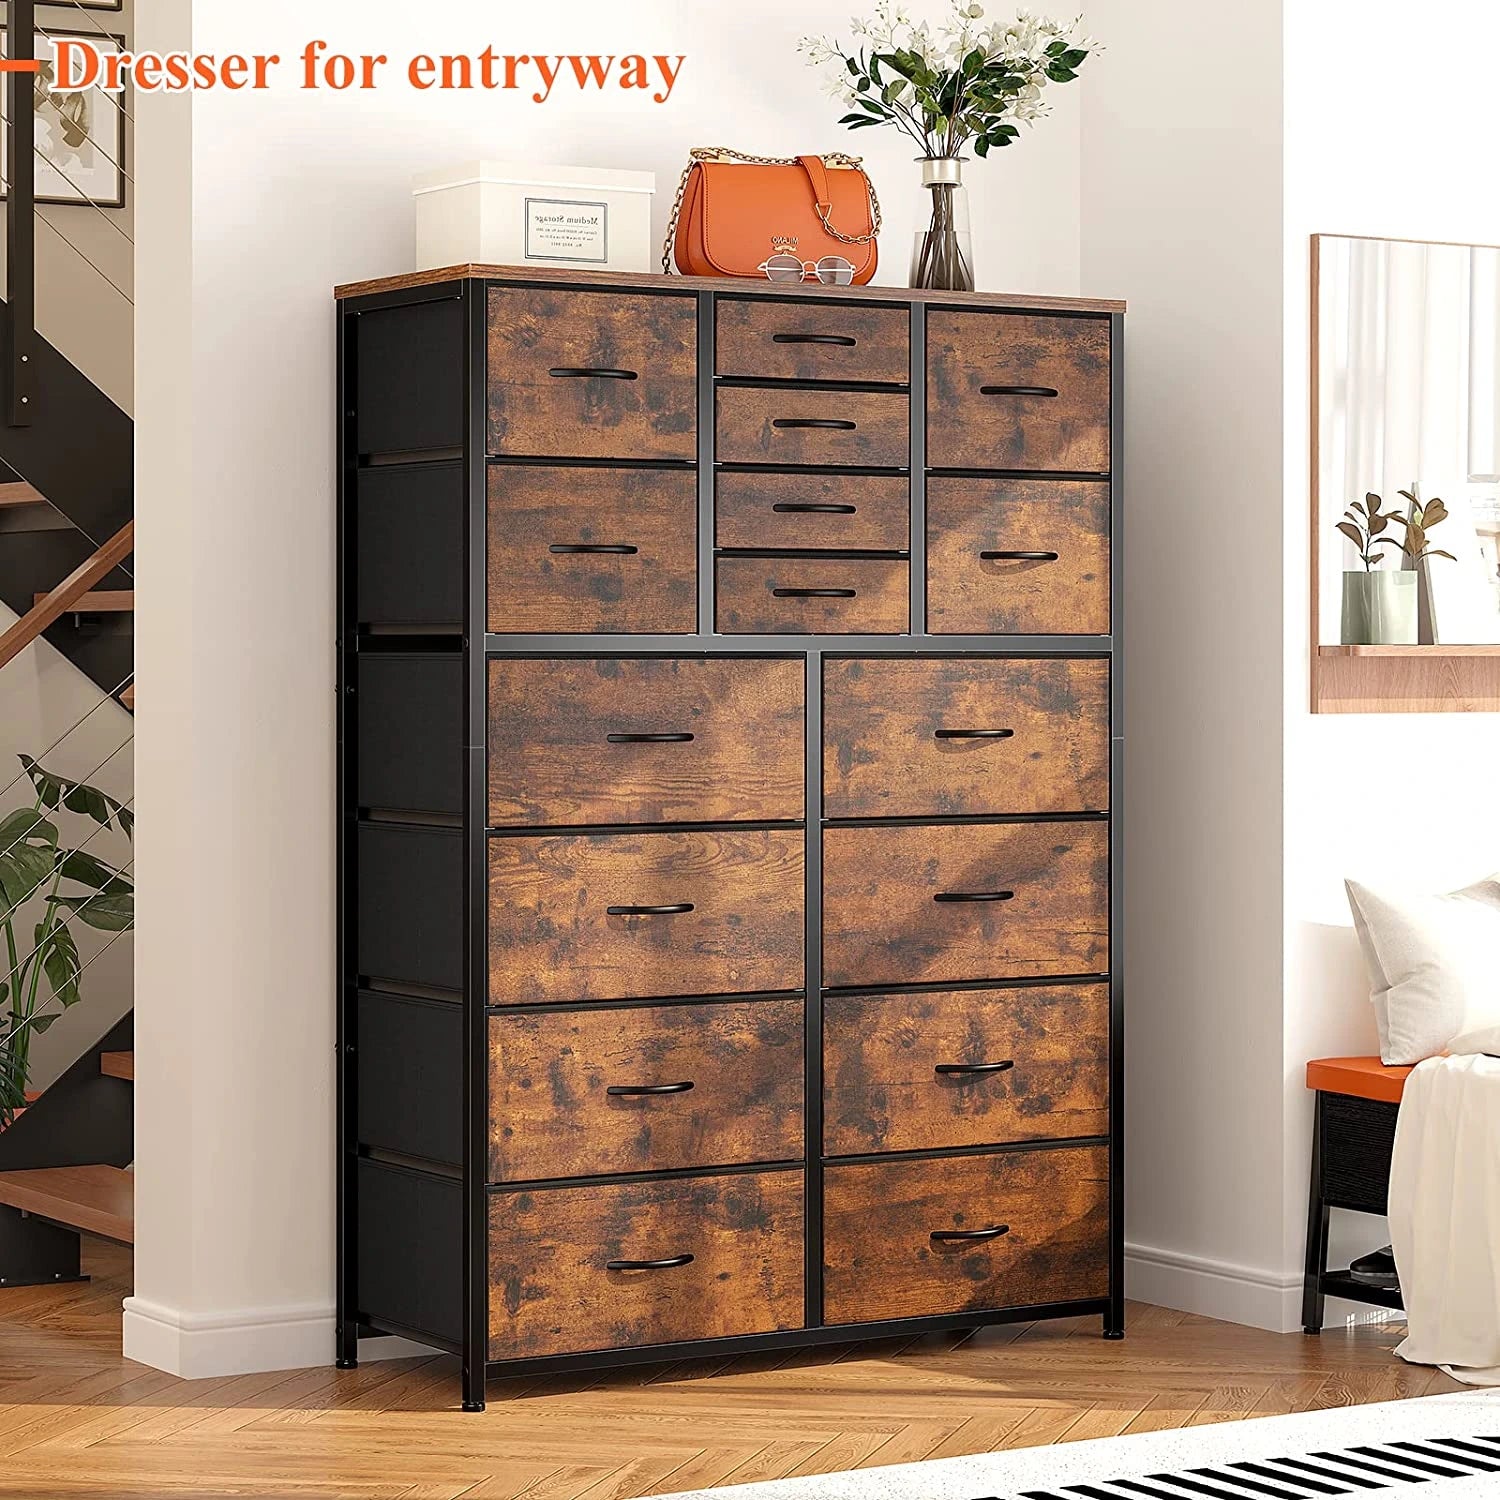 Enhomee large dressers & chest of drawers for bedroom closet